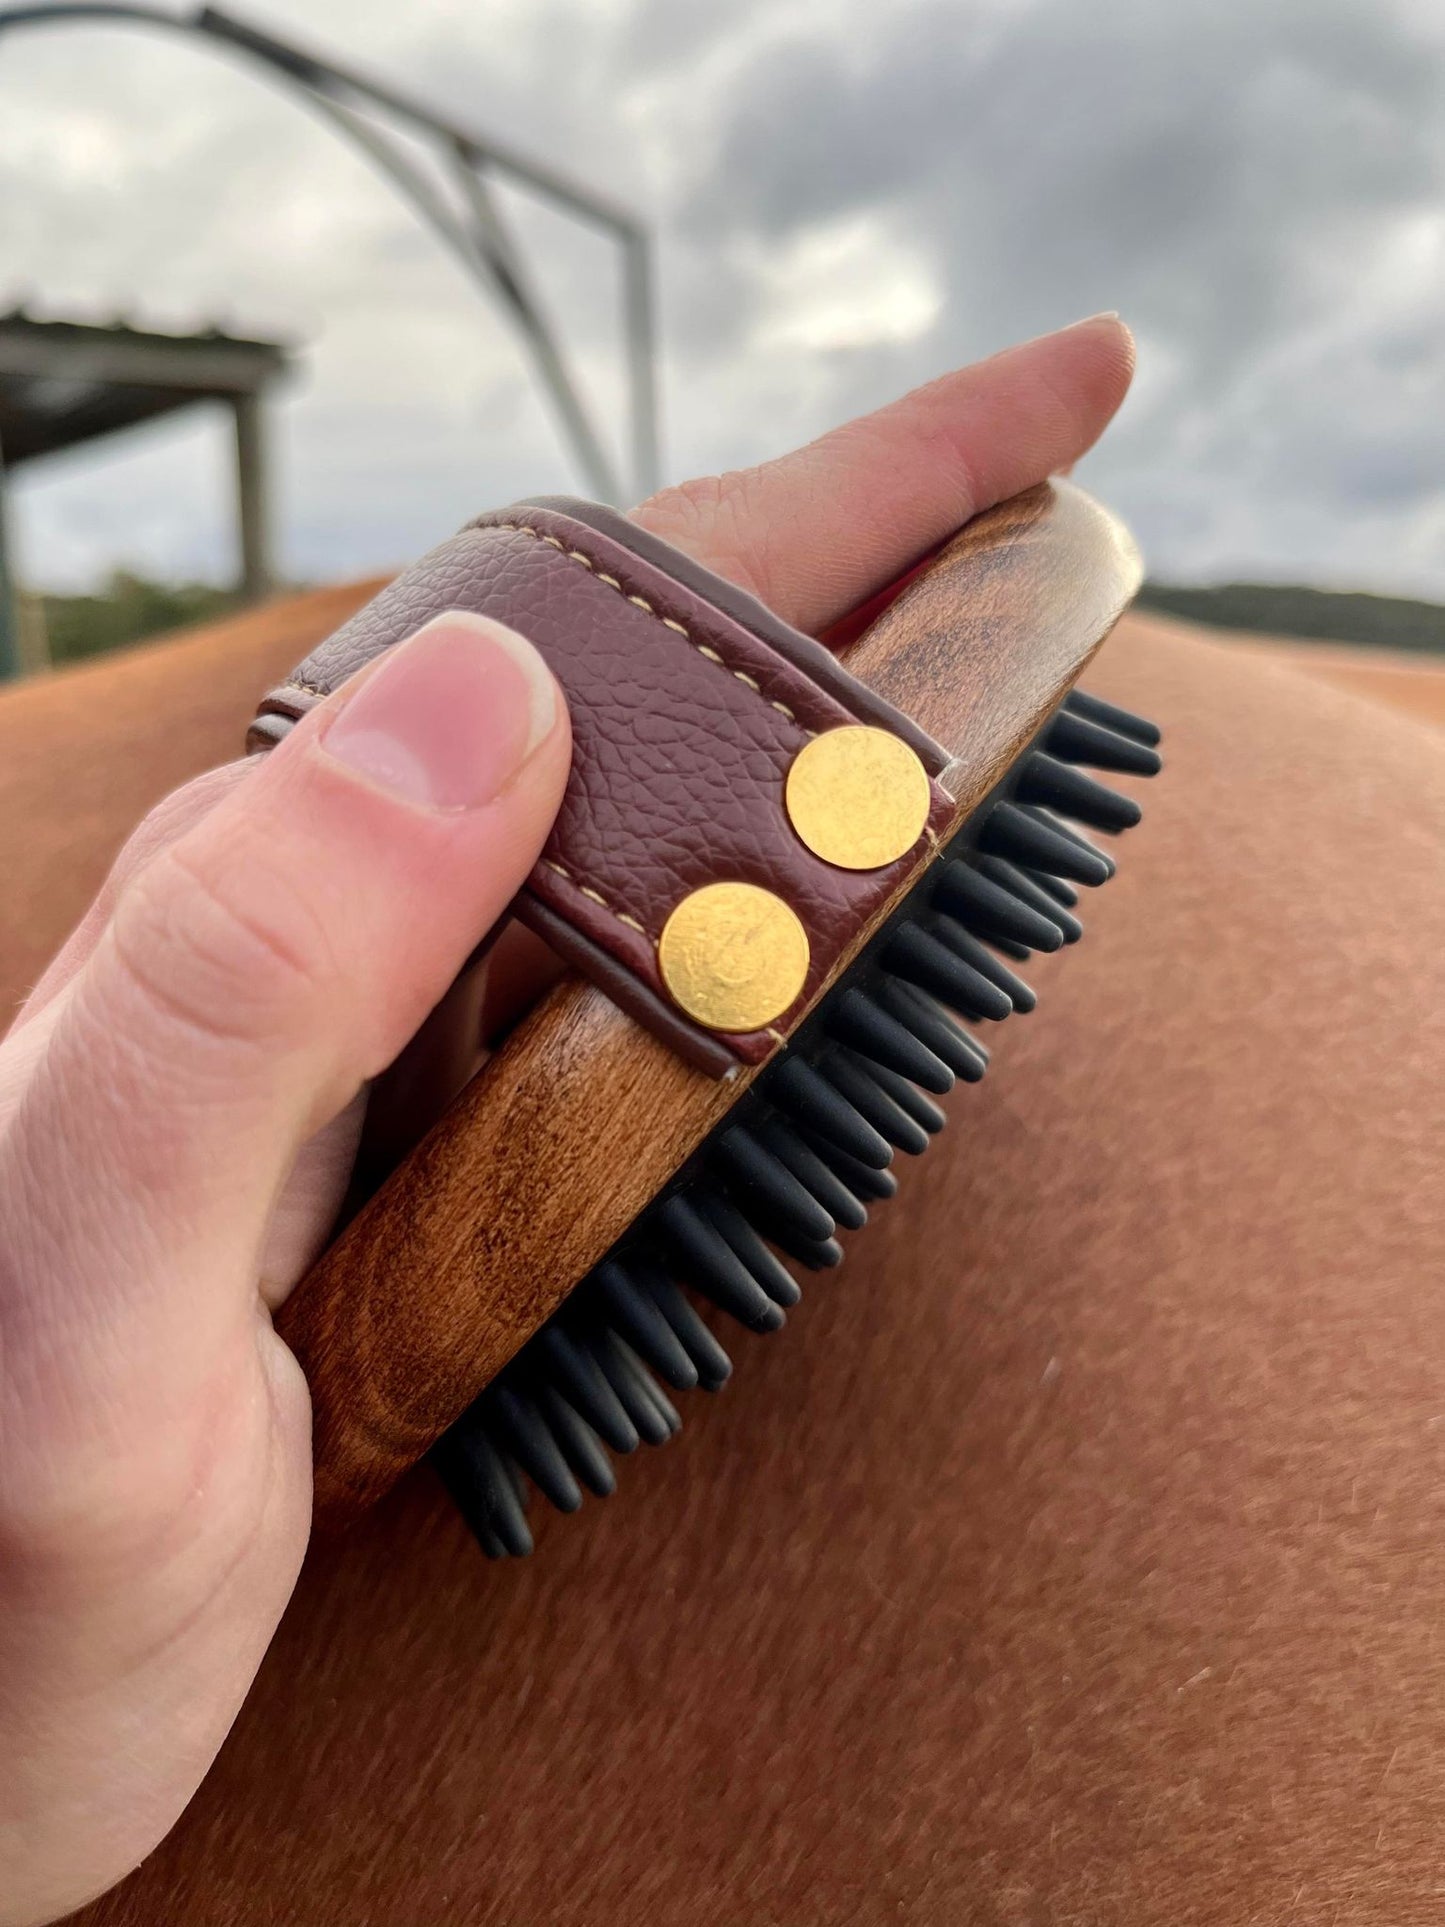 A side on view of the rubber brush in a person's hand. Showing the signiature beechwood material, black rubber bristles and gold detailing on the handle.